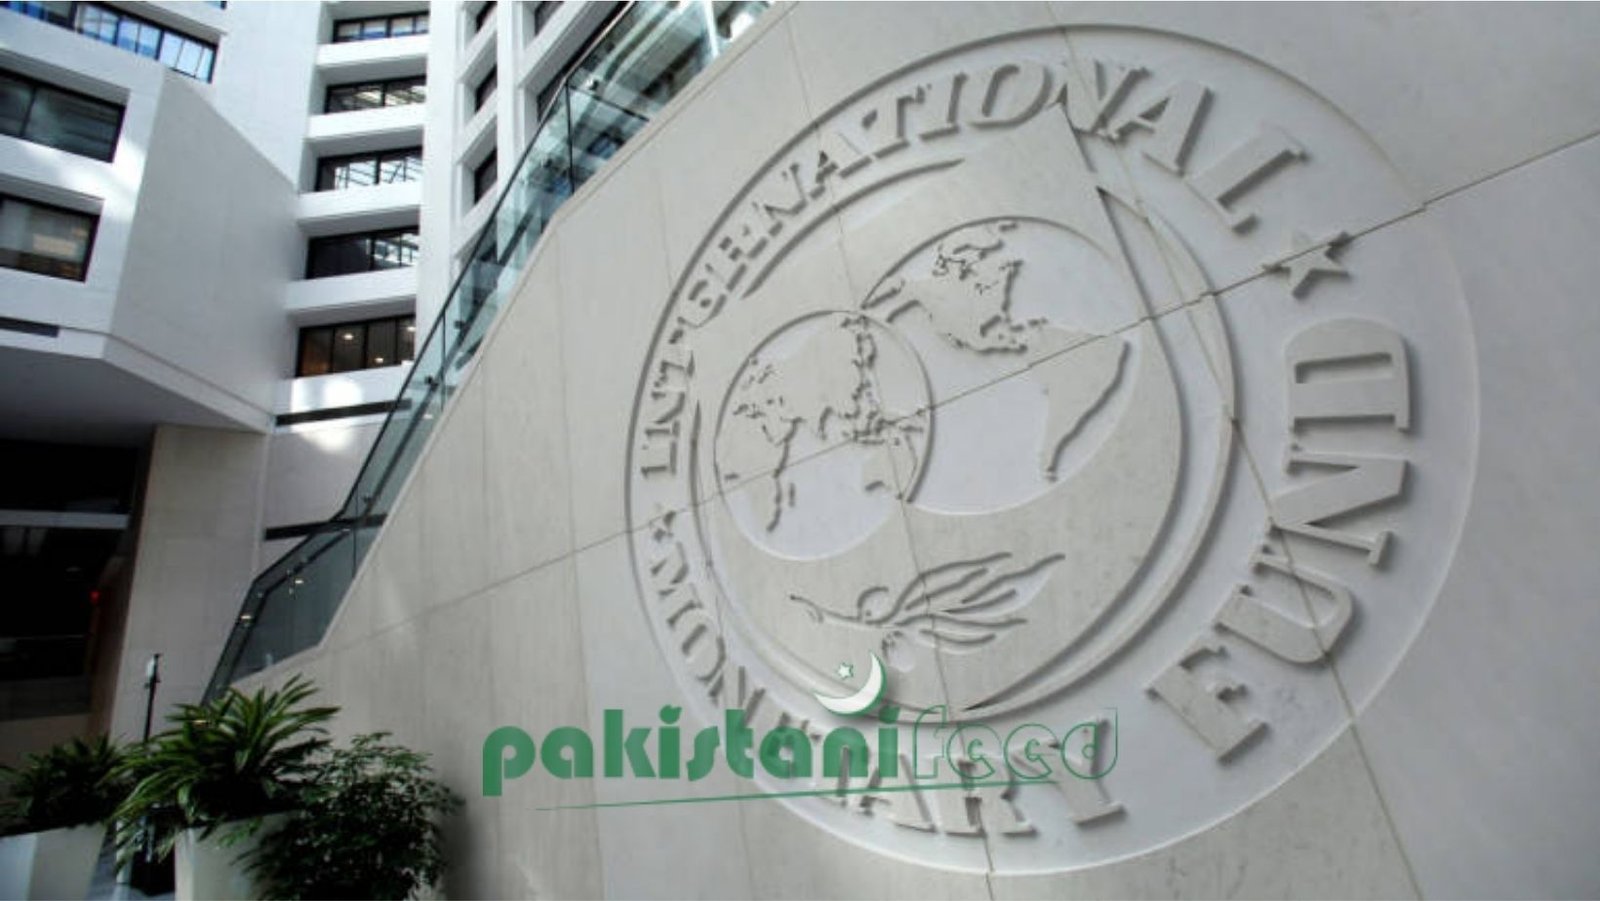 Pakistan Must Meet a Long List of Conditions_ IMF